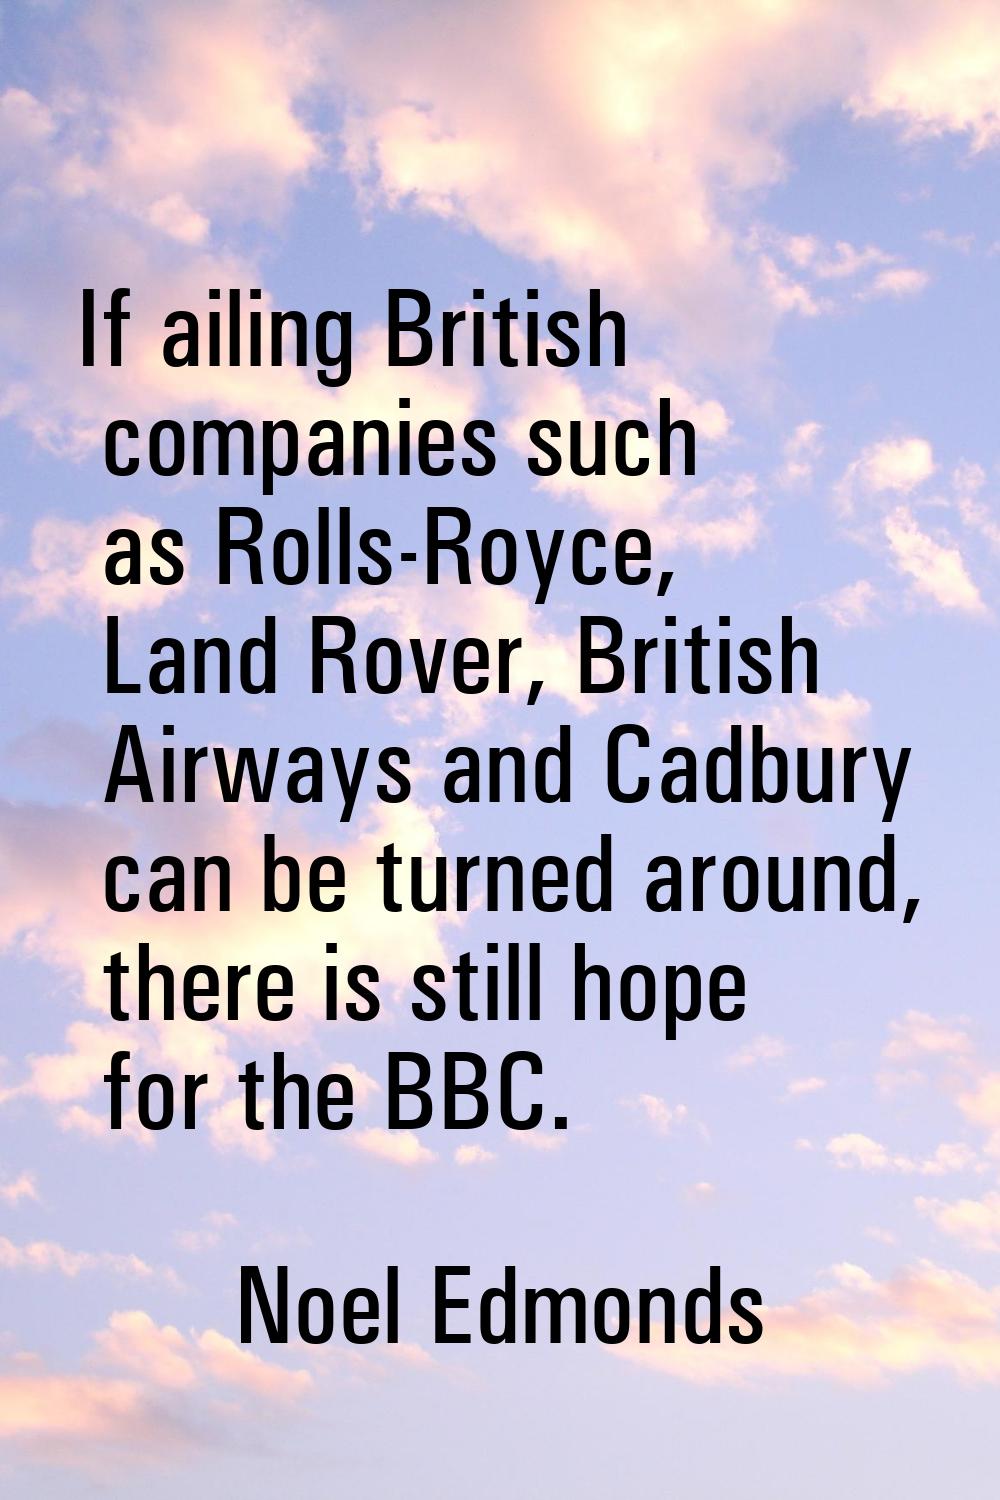 If ailing British companies such as Rolls-Royce, Land Rover, British Airways and Cadbury can be tur